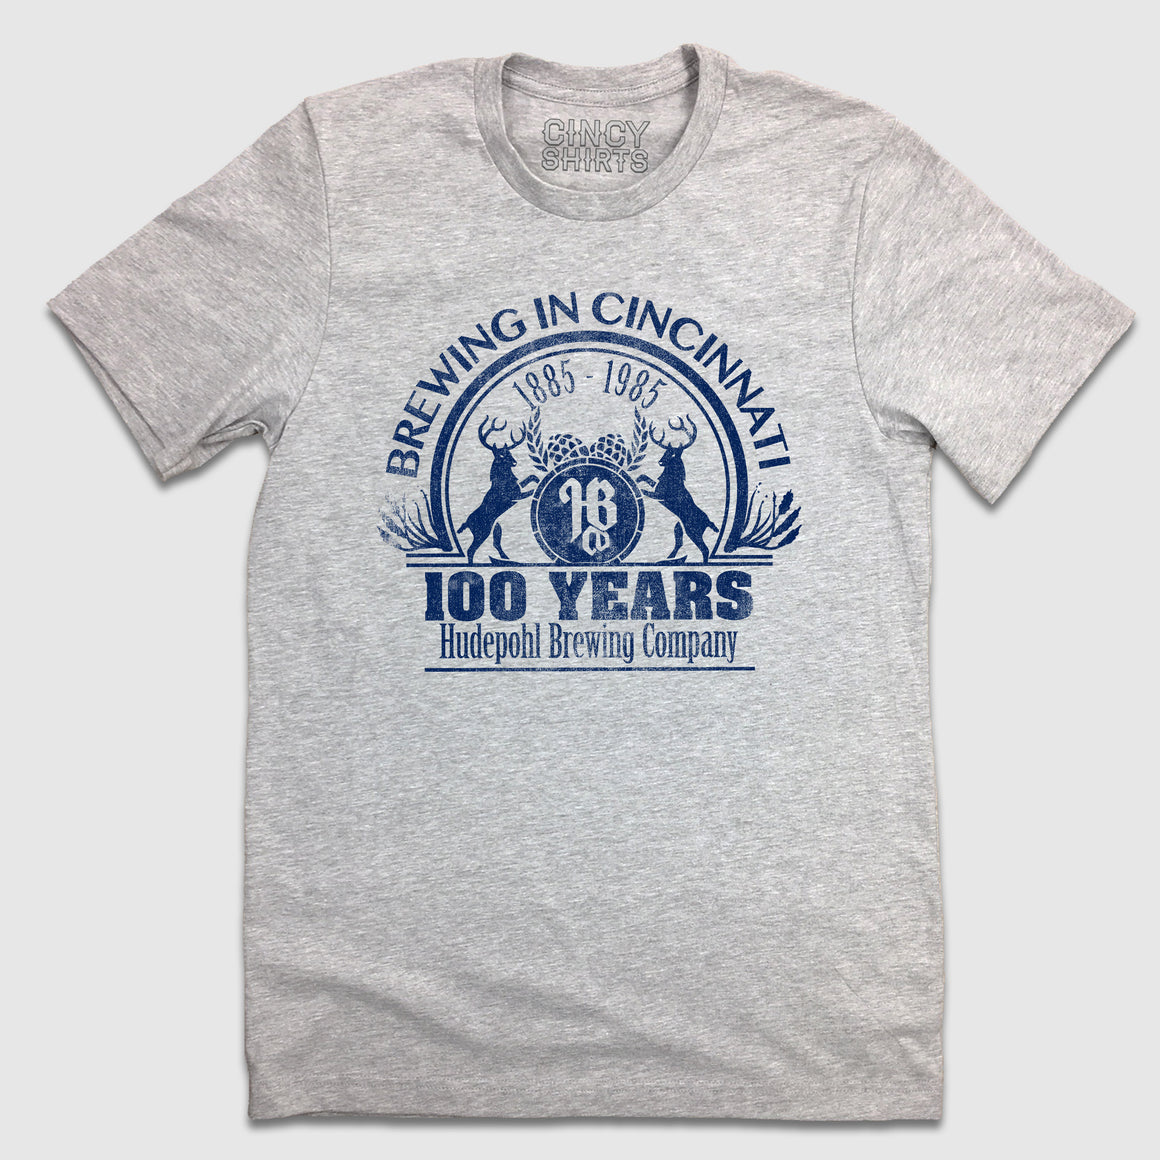 Hudepohl Pure Lager 100 years - Unisex T-Shirt - Cincy Shirts